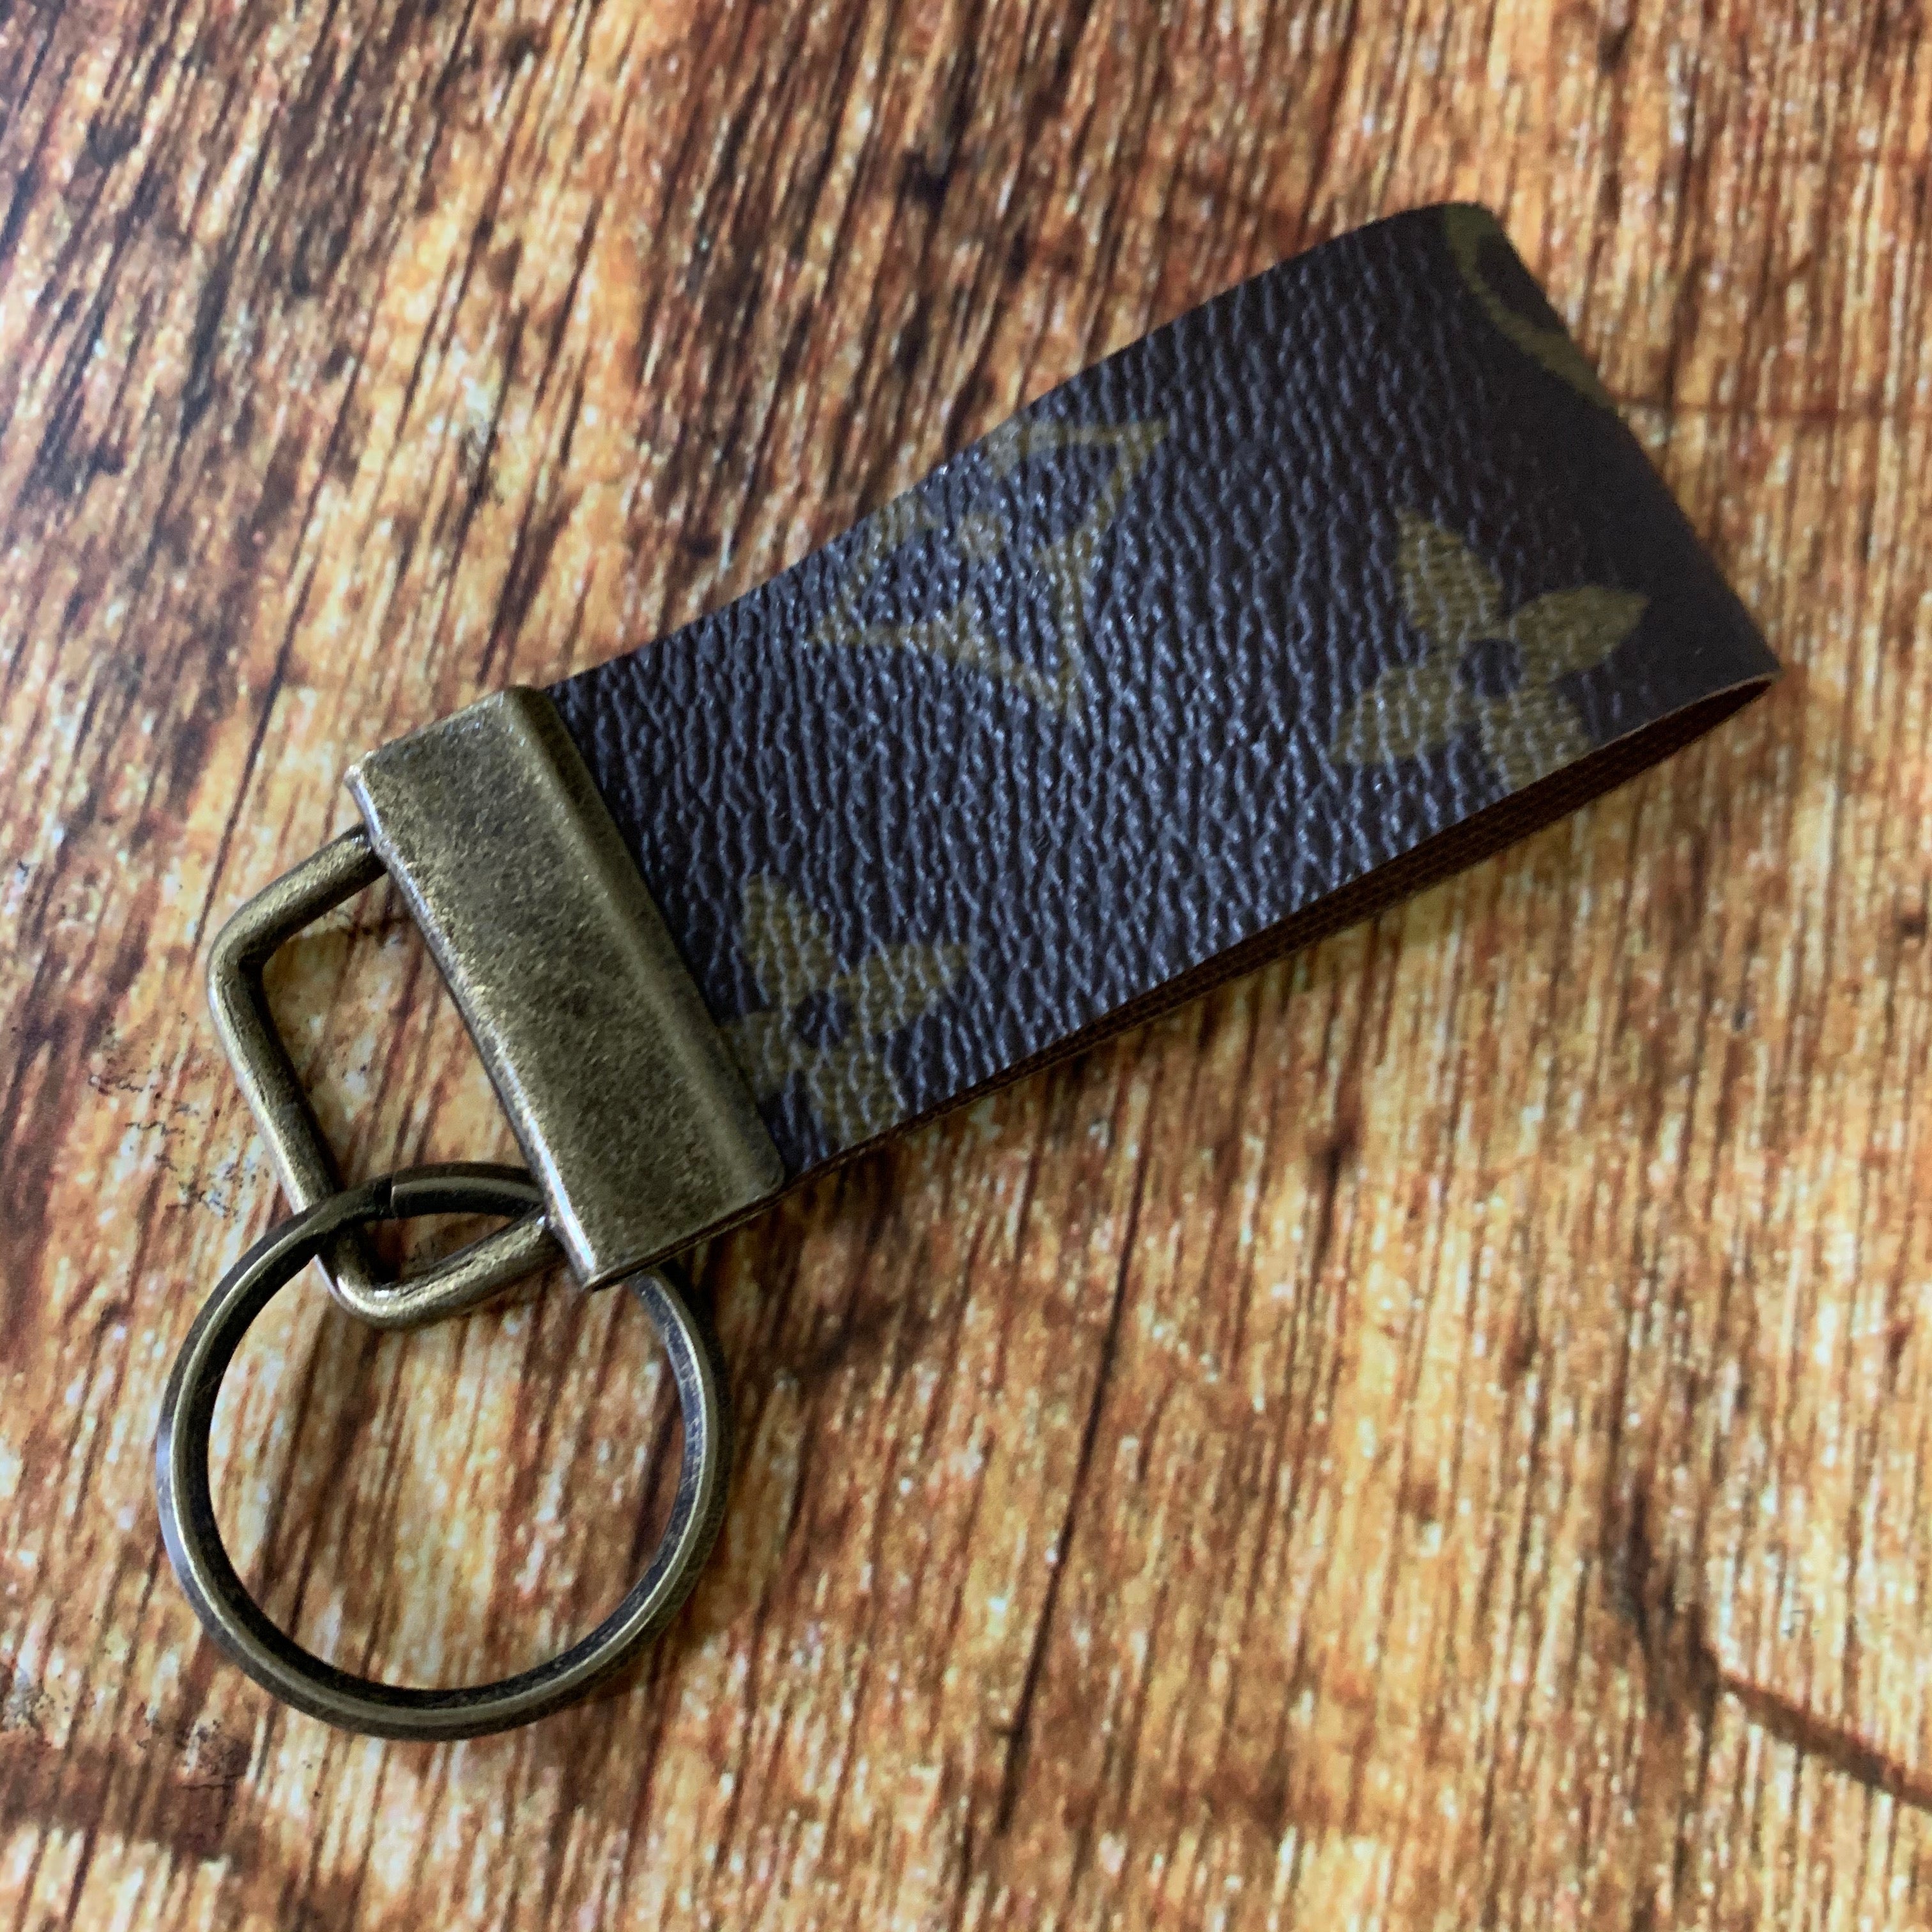 Repurposed Louis Vuitton Leather Key Chain Wide